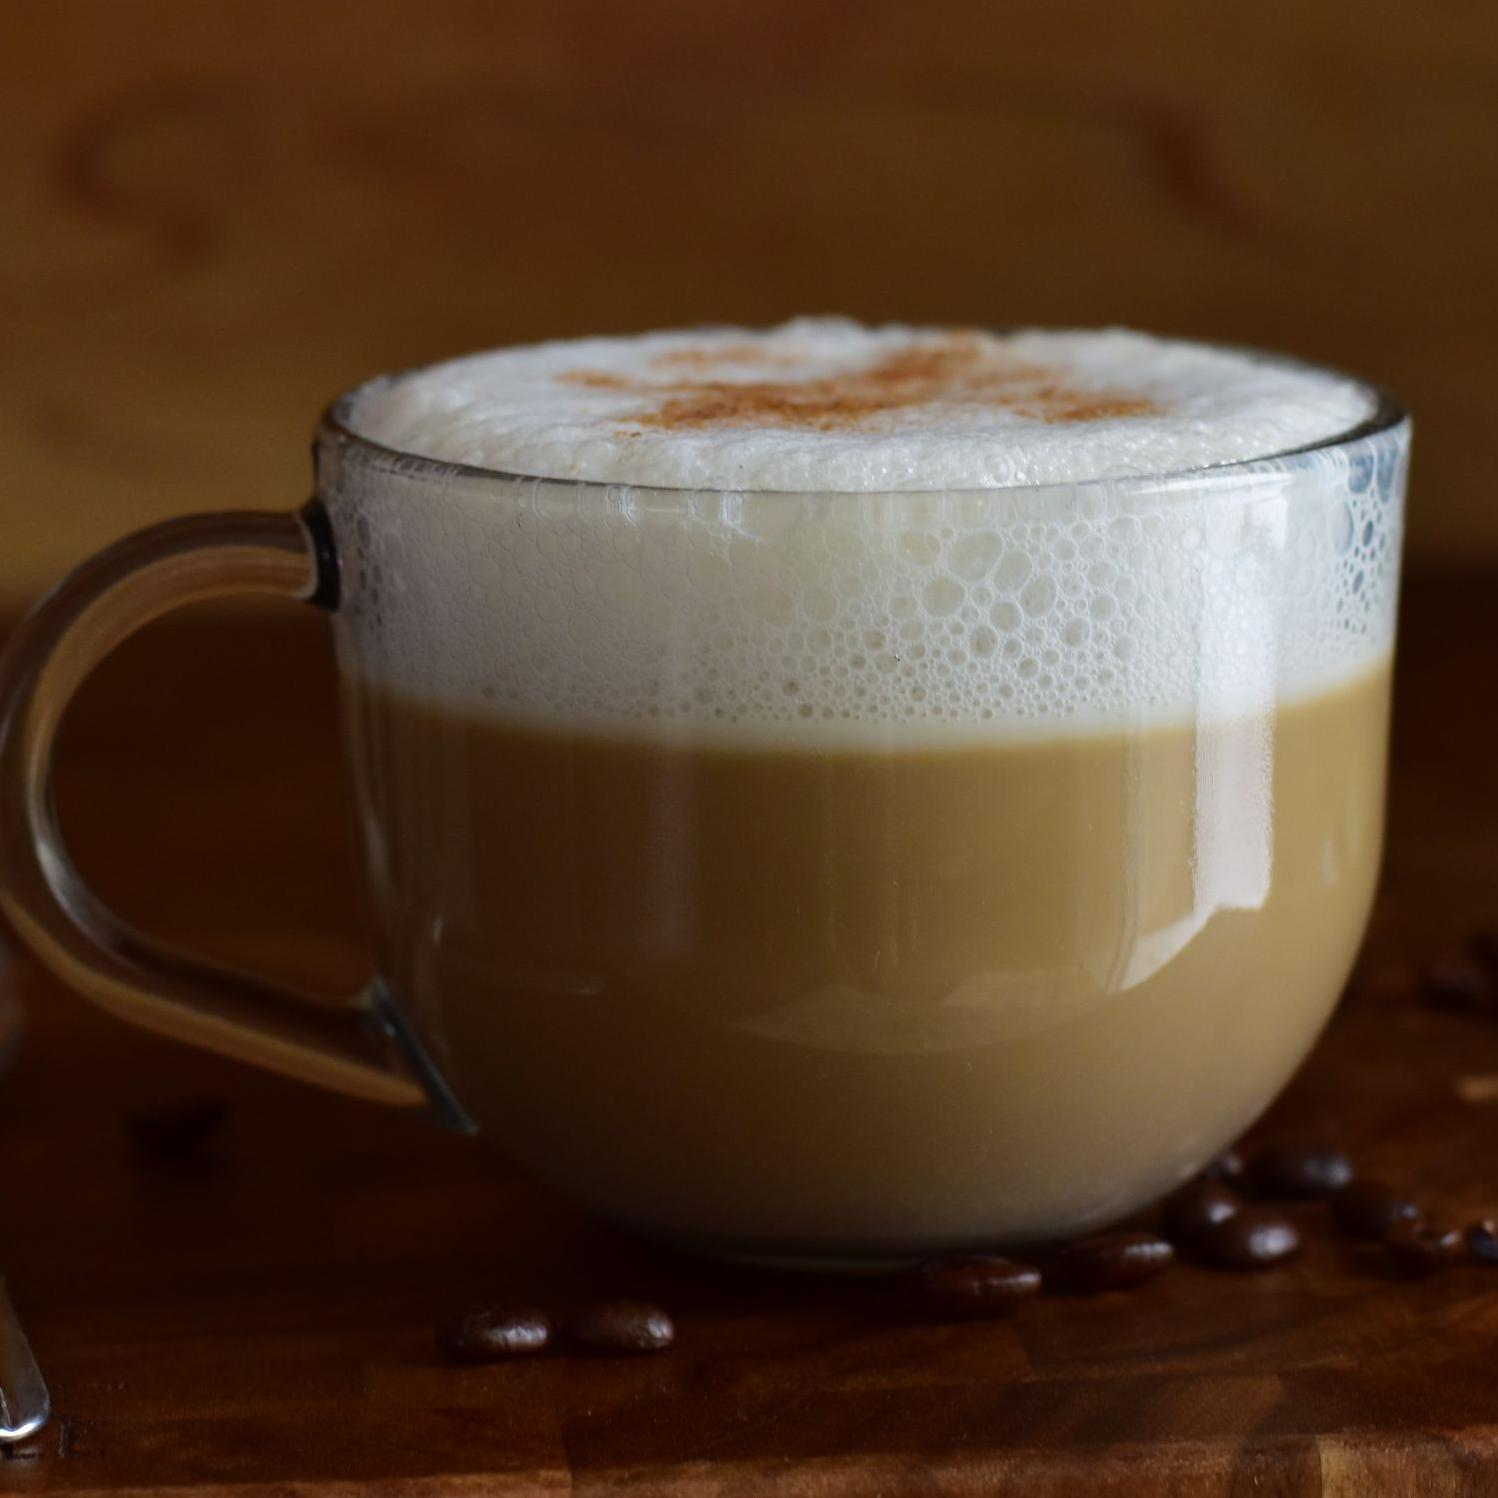  With this recipe, you'll be able to create lattes just like your favorite